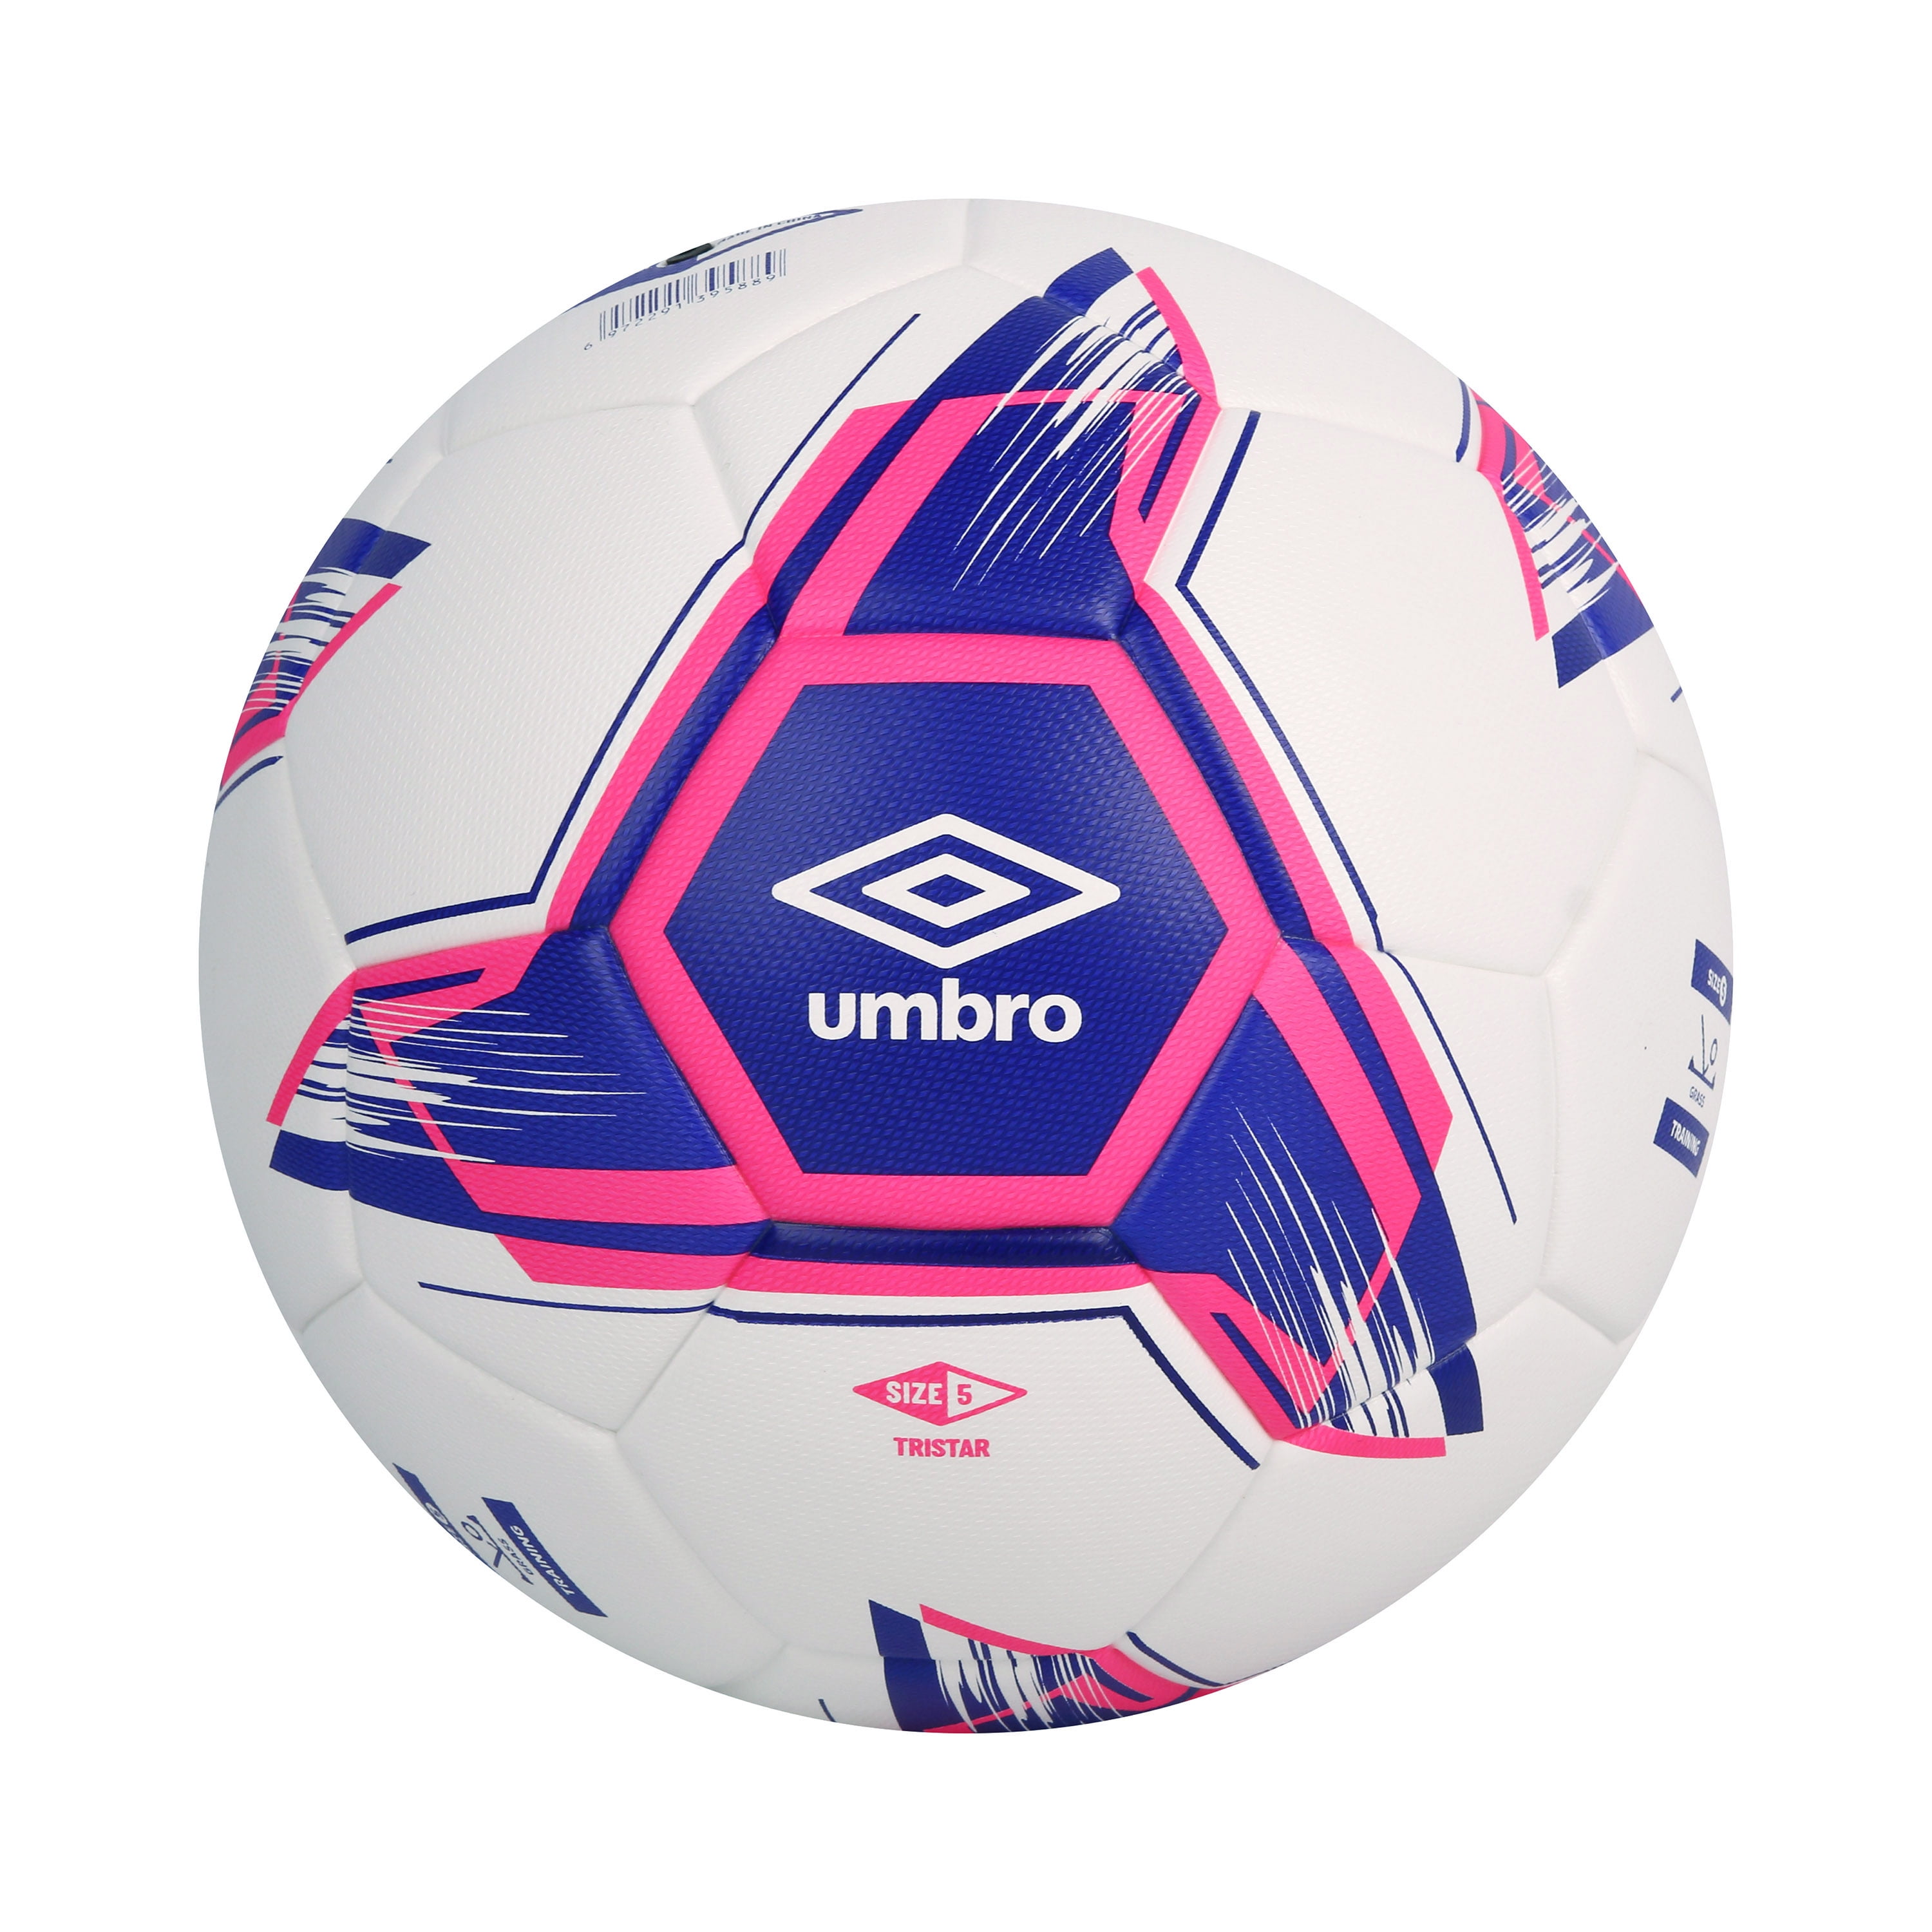 USA Team SOCCER BALL SIZE 5 OFFICIAL PRODUCT SHIPS INFLATED Low Price!!!!Pink 